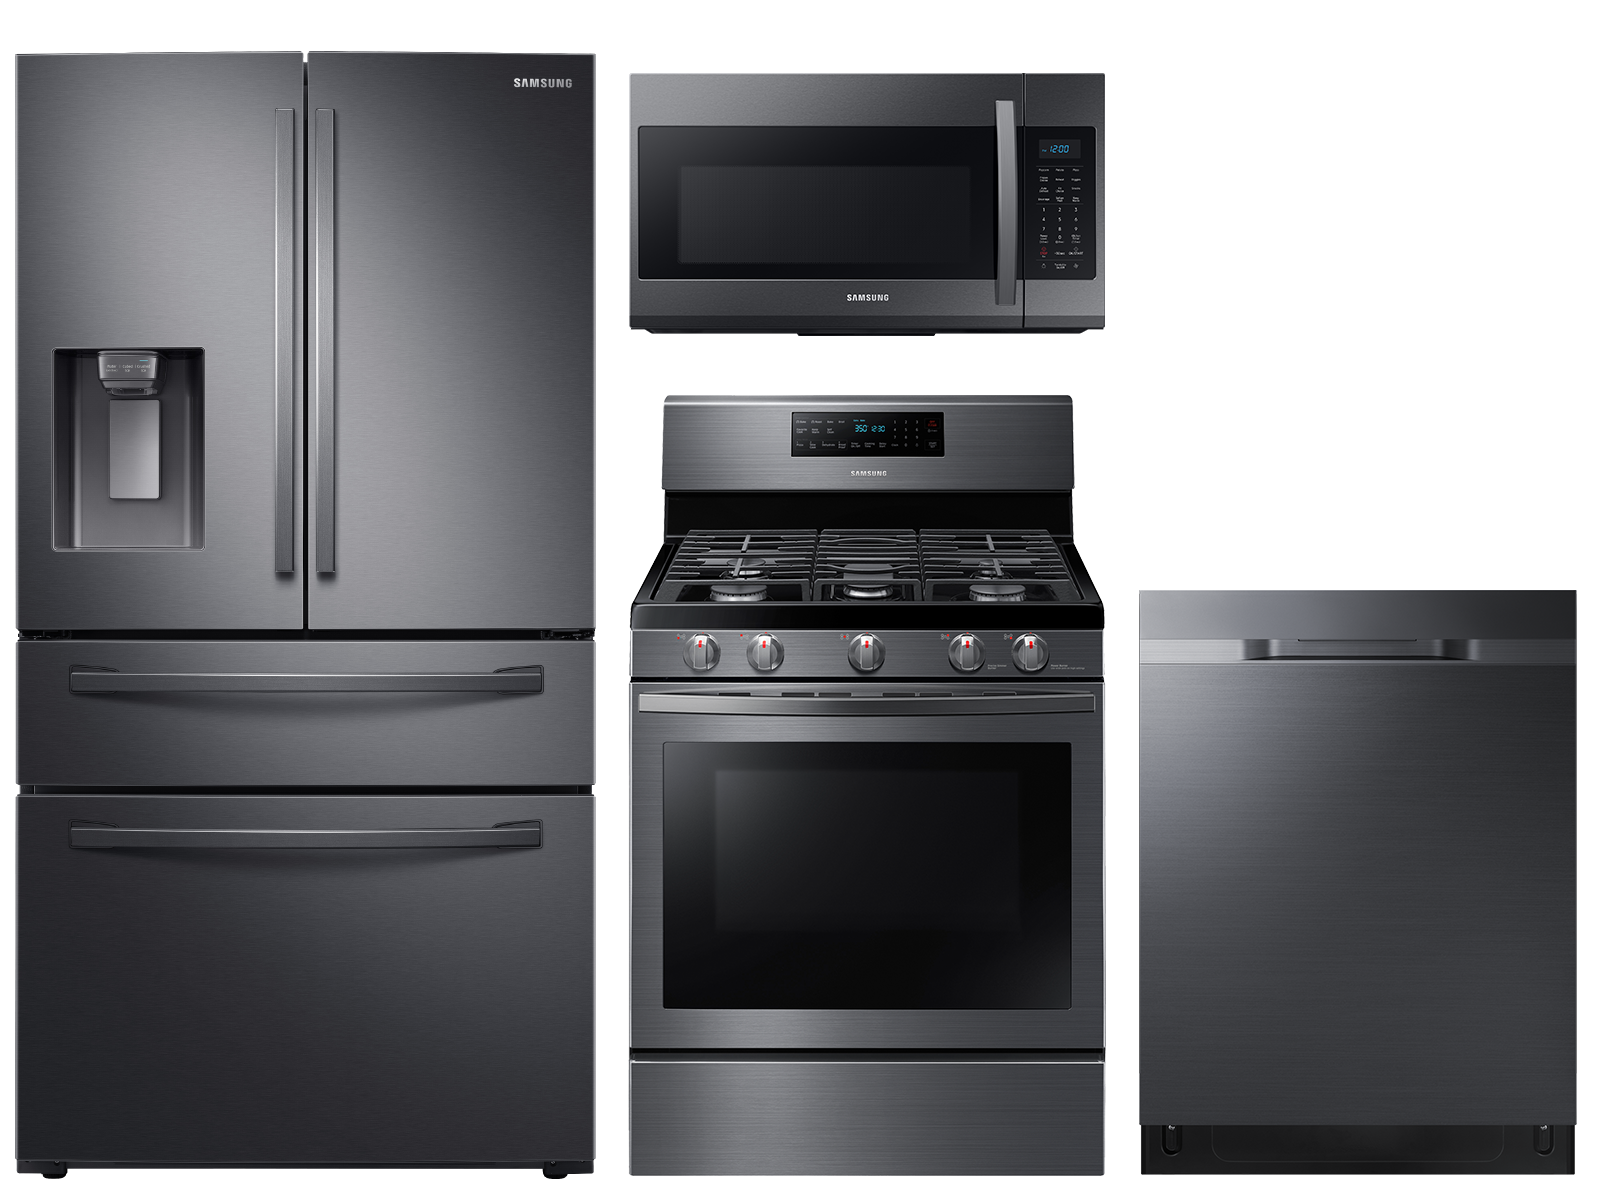 Large Capacity 4-door Refrigerator + Gas Range with Convection + StormWash™ Dishwasher + Microwave in Black Stainless